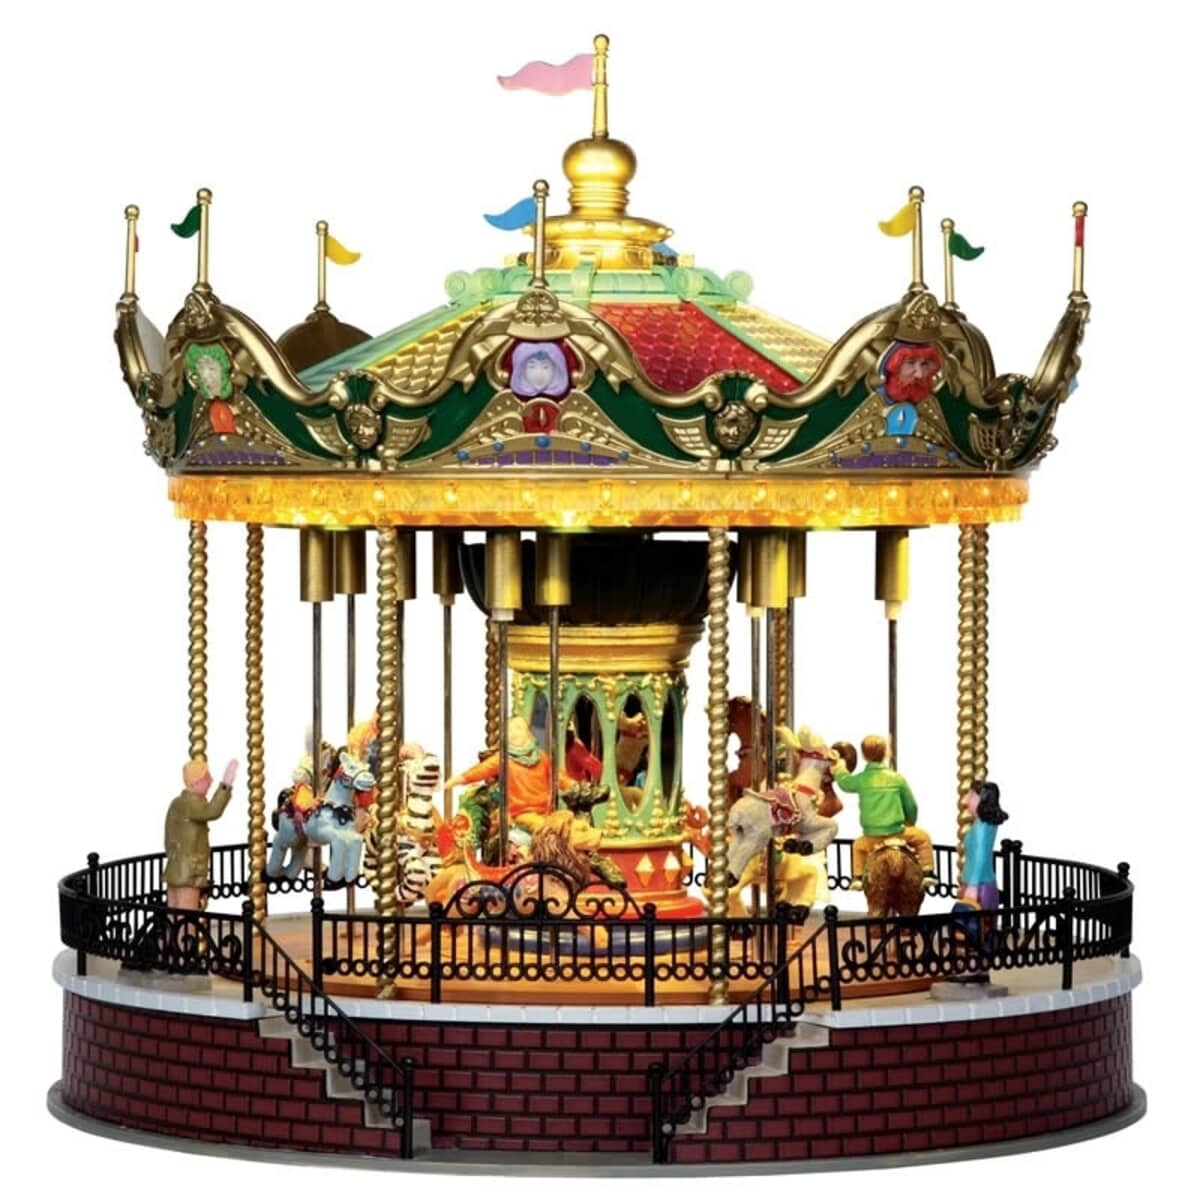 Lemax - Sunshine Carousel - (14325) - £116.99 from Lemax Collectables